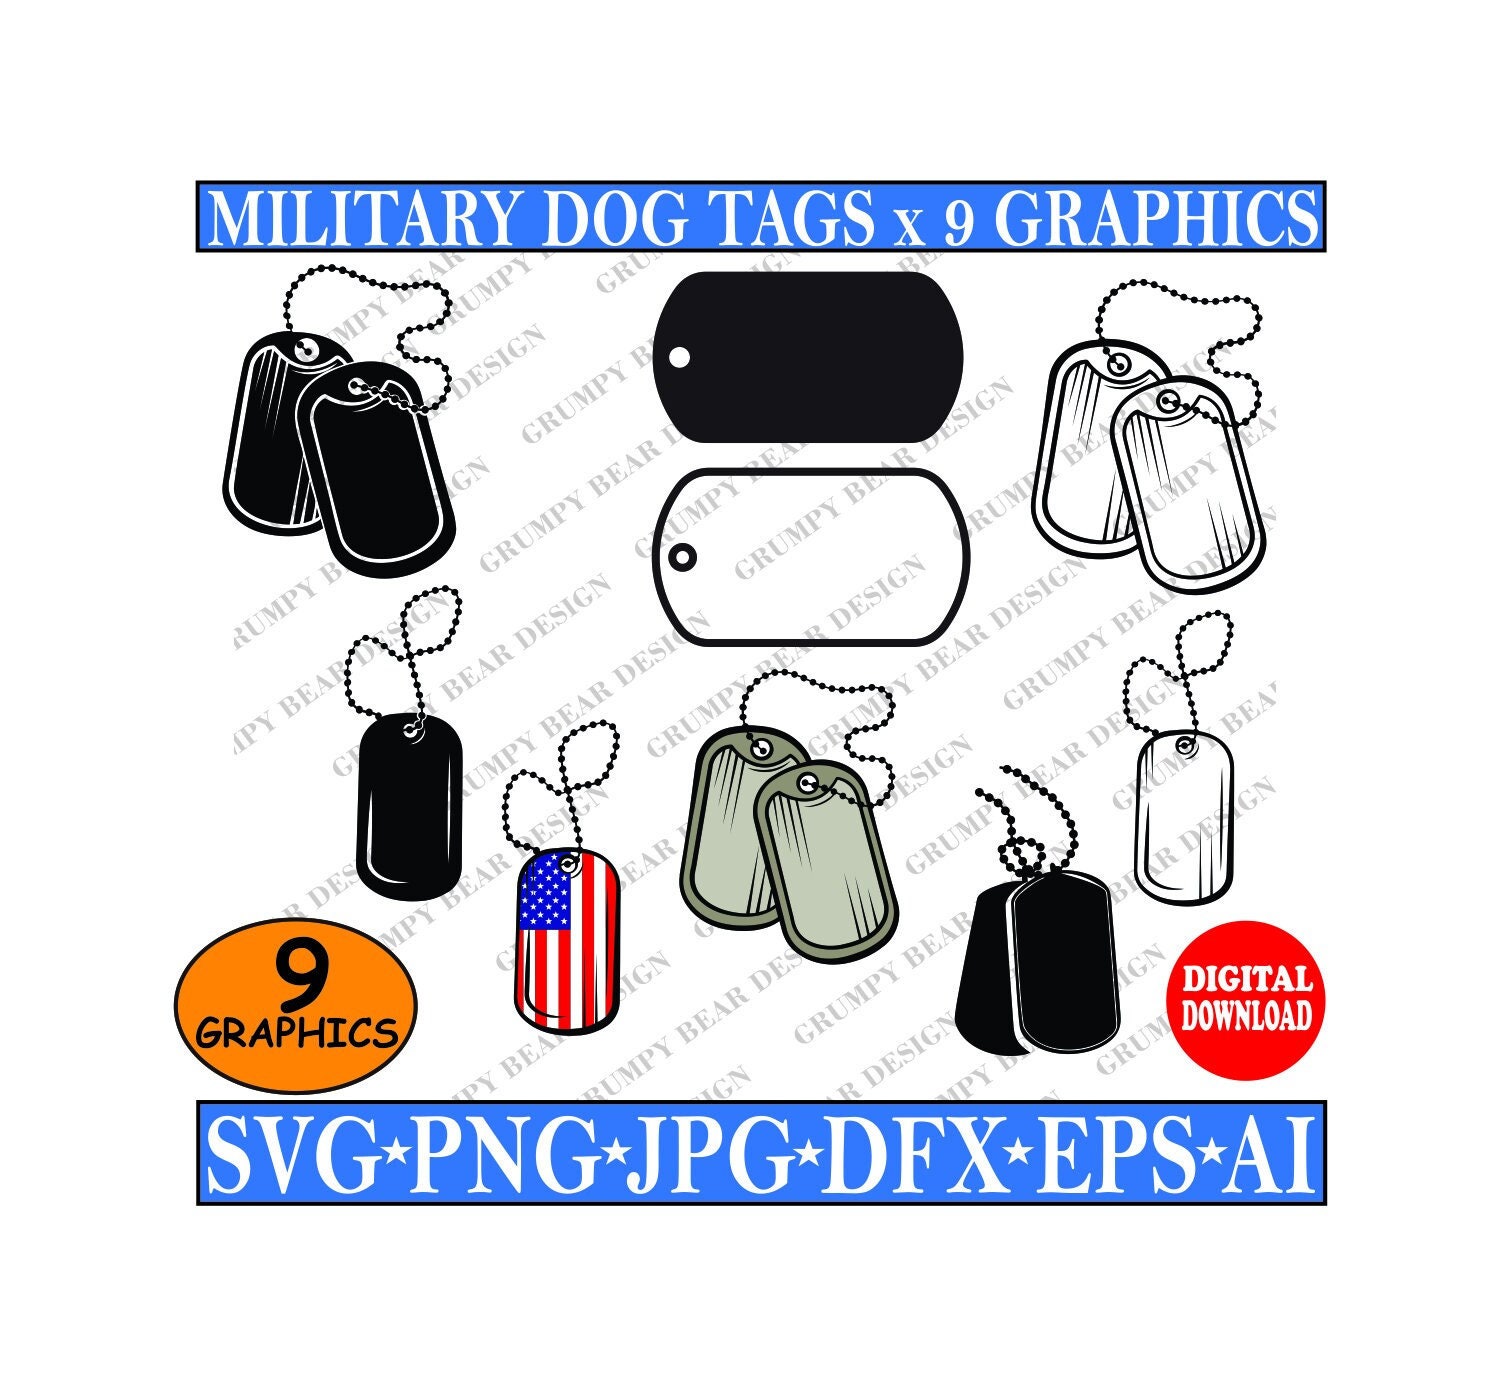 Military Army Tag With Chain, Personalized Double Sided Photo Laser  Engraved Black TAG With Chain, Black Dog Tag 